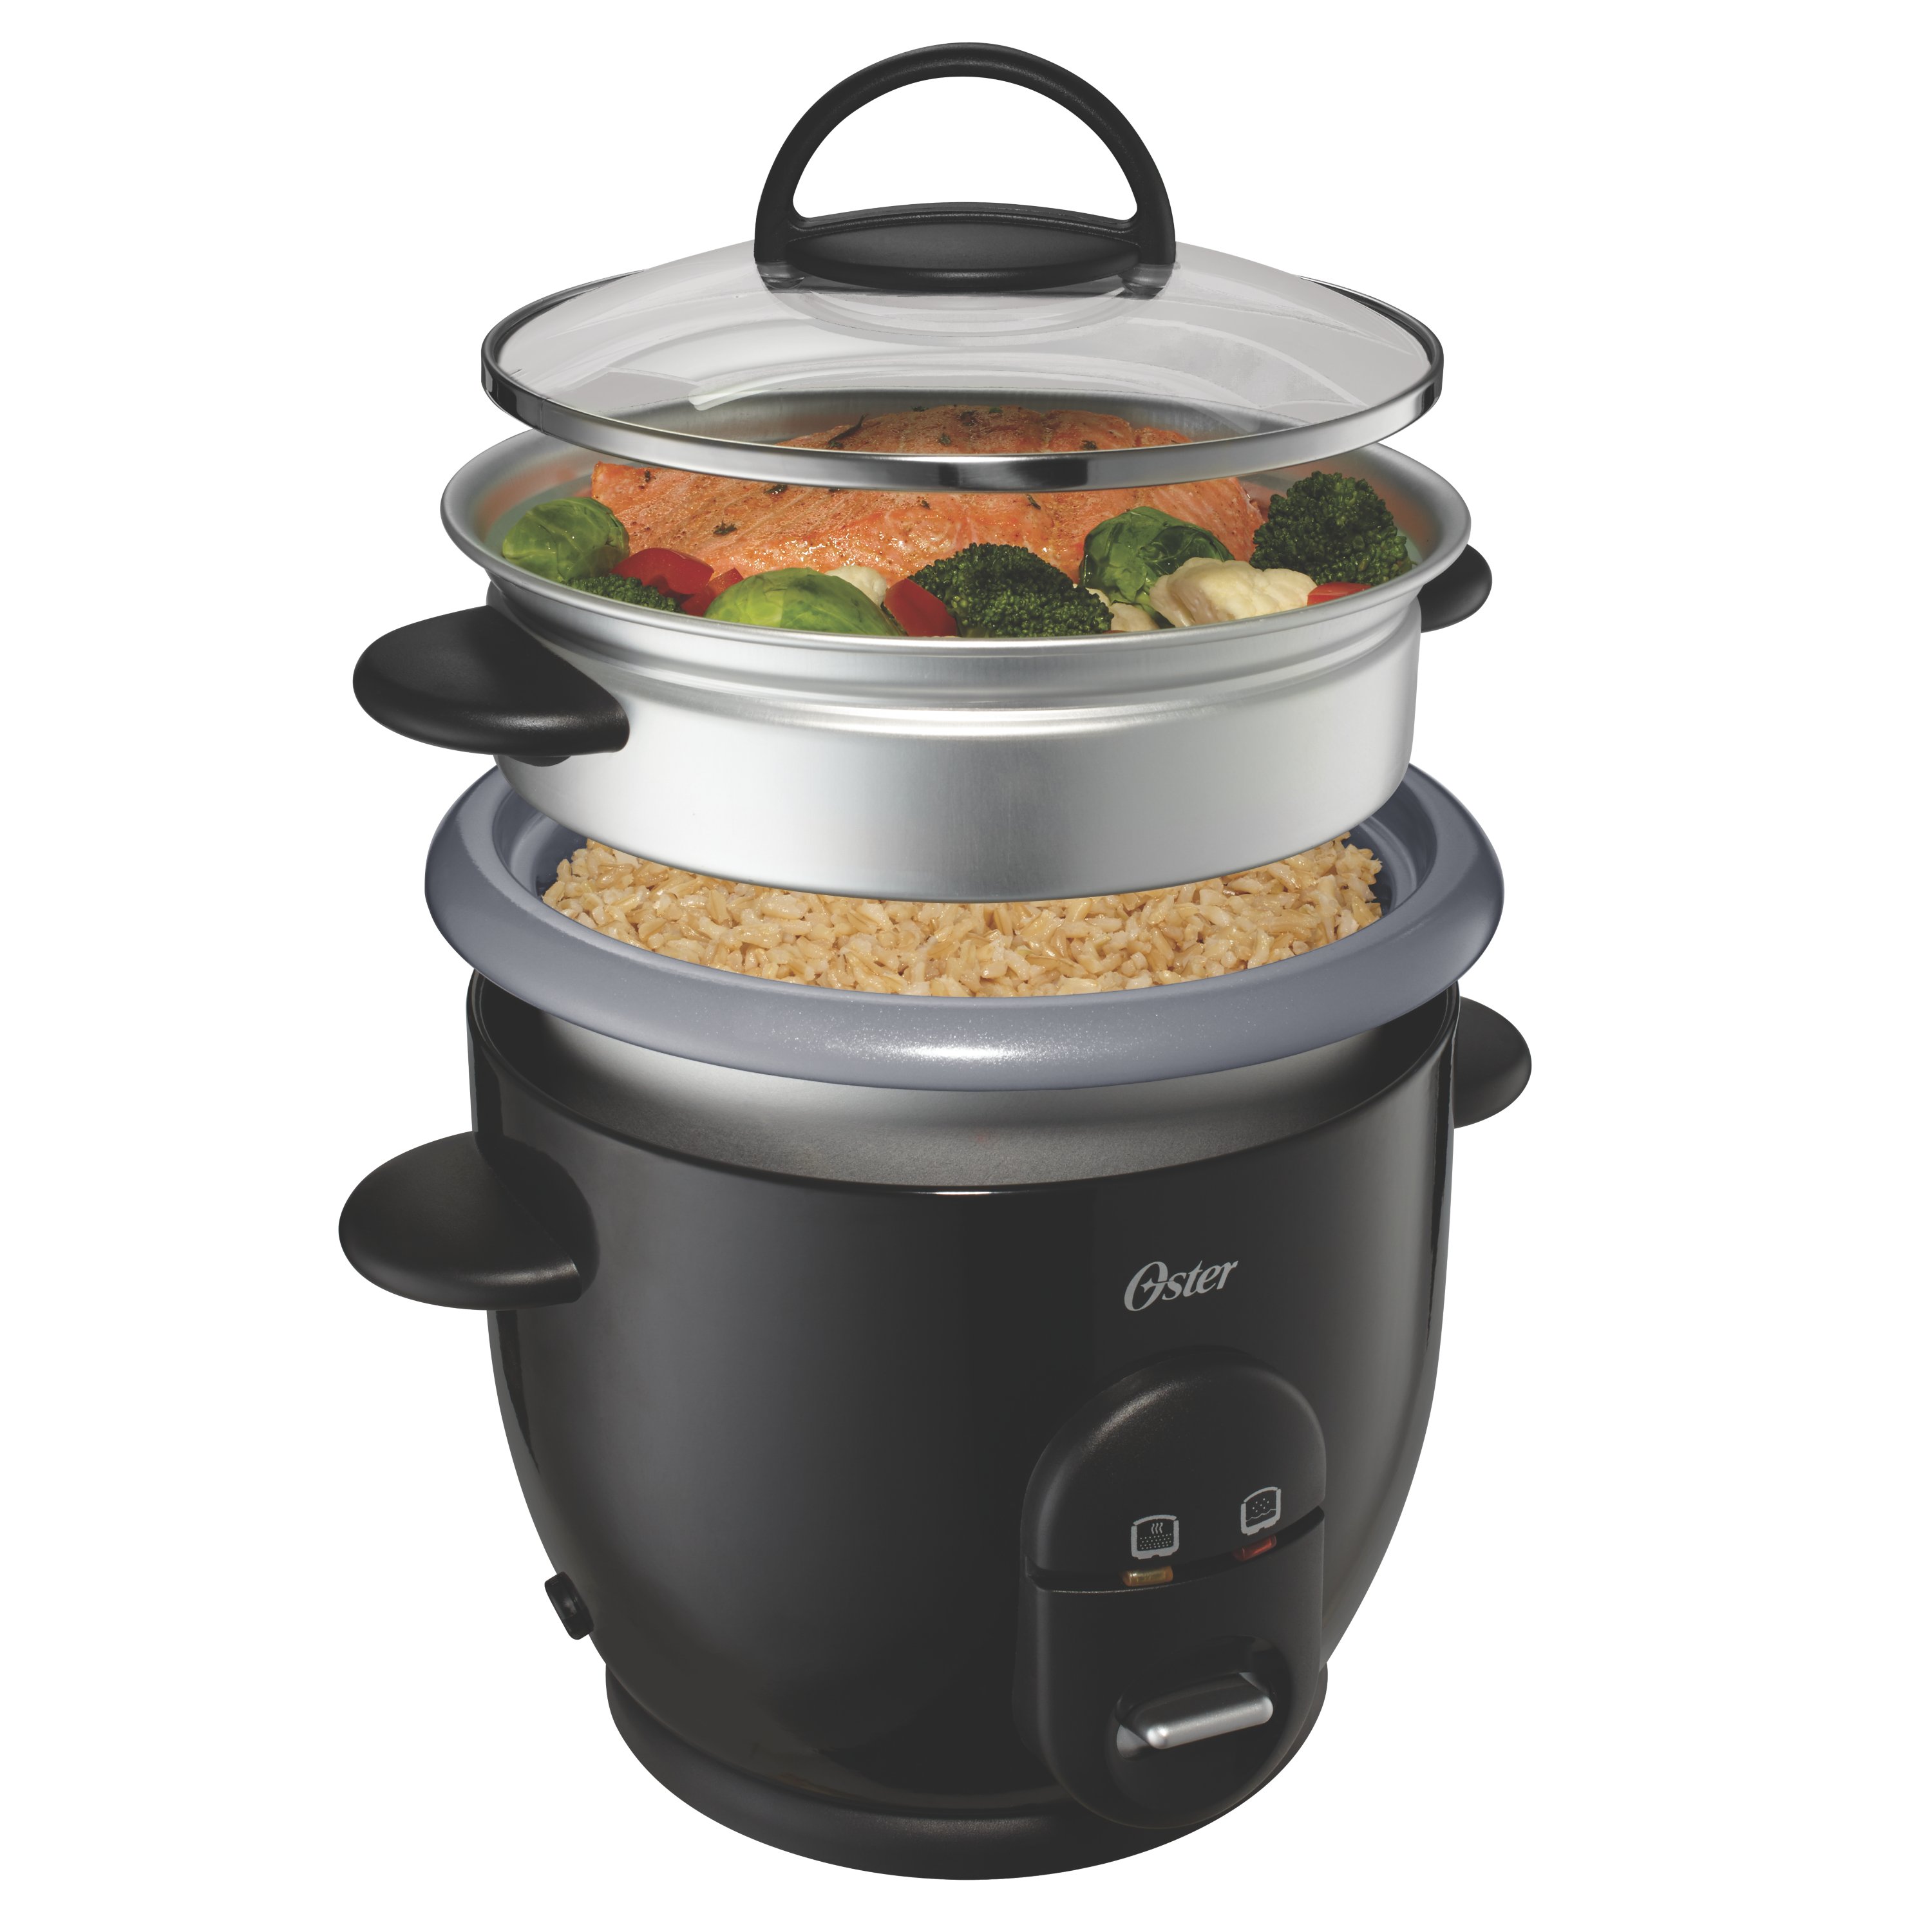 My Oster DuraCeramic 6-Cup Rice Cooker: Review & Cooking Demo